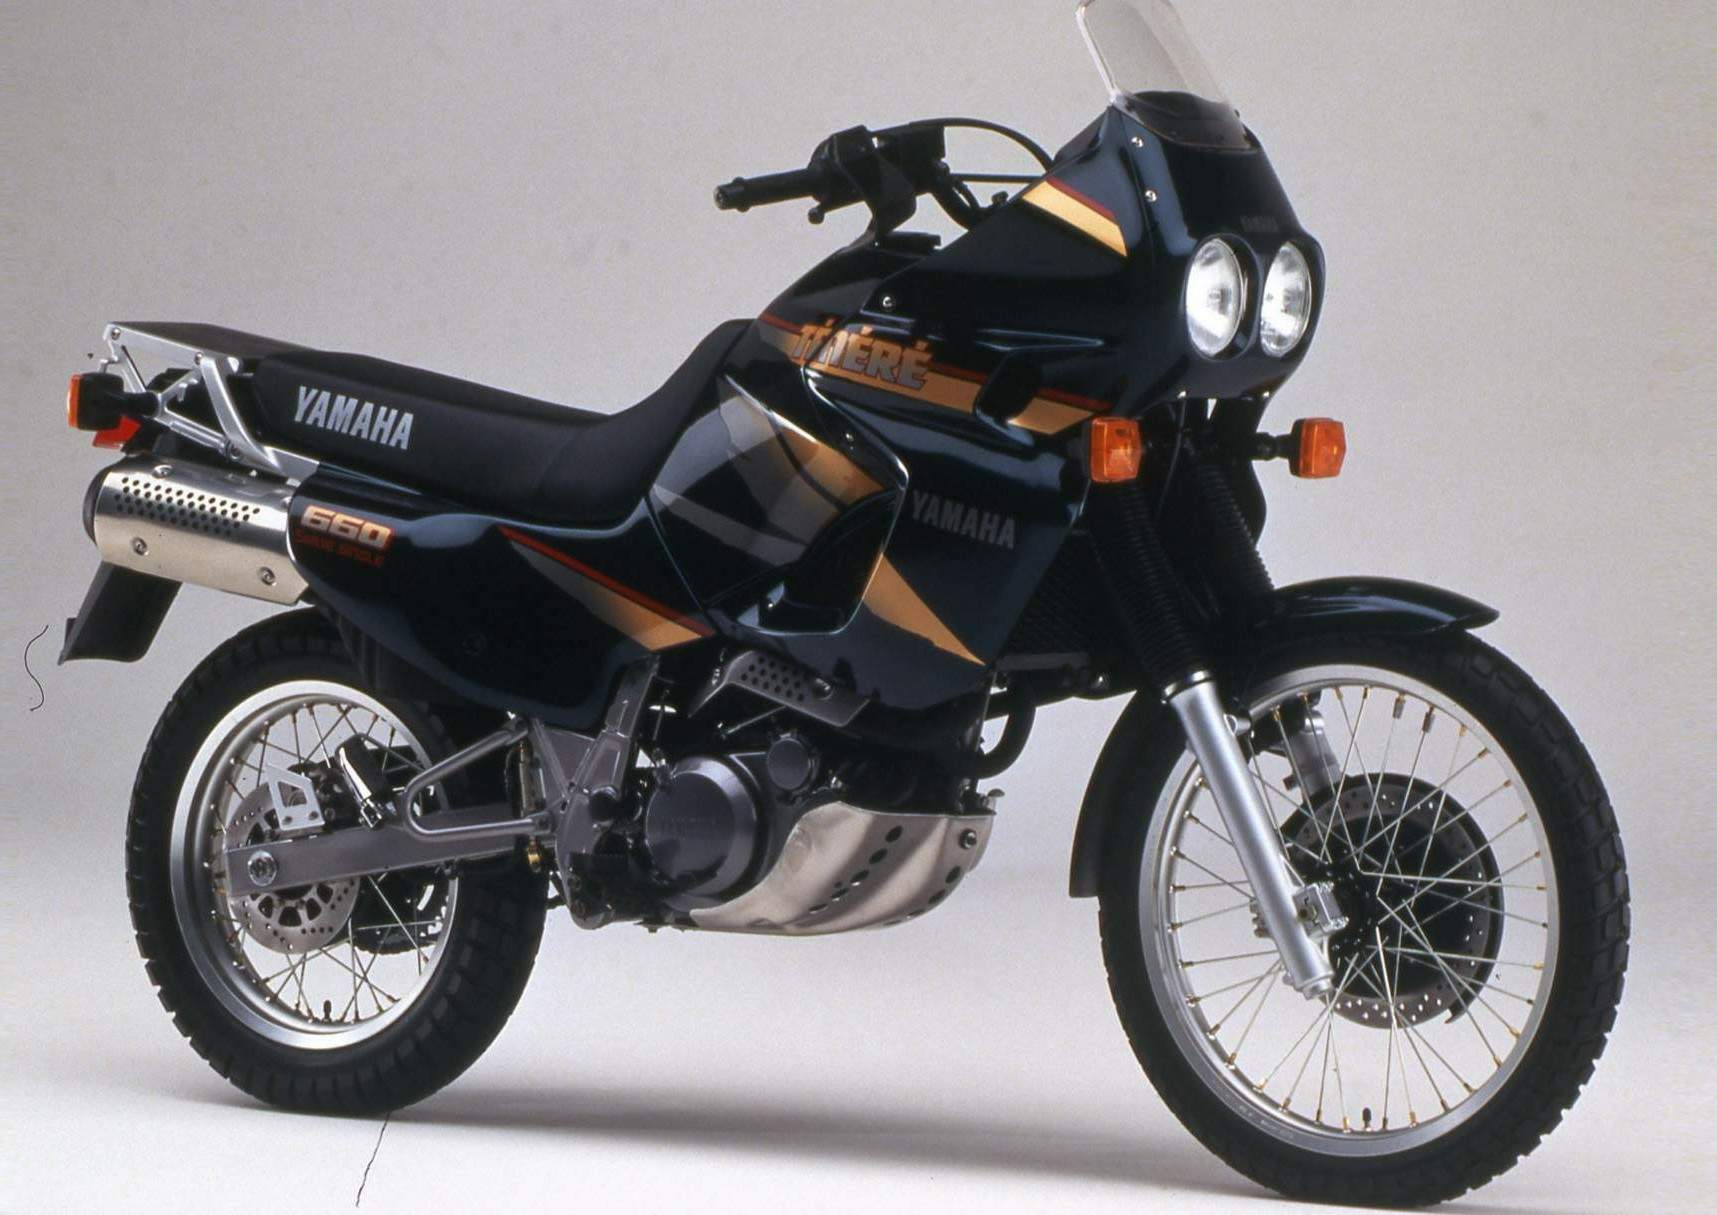 Yamaha XTZ 660T&#233;n&#233;r&#233; technical specifications